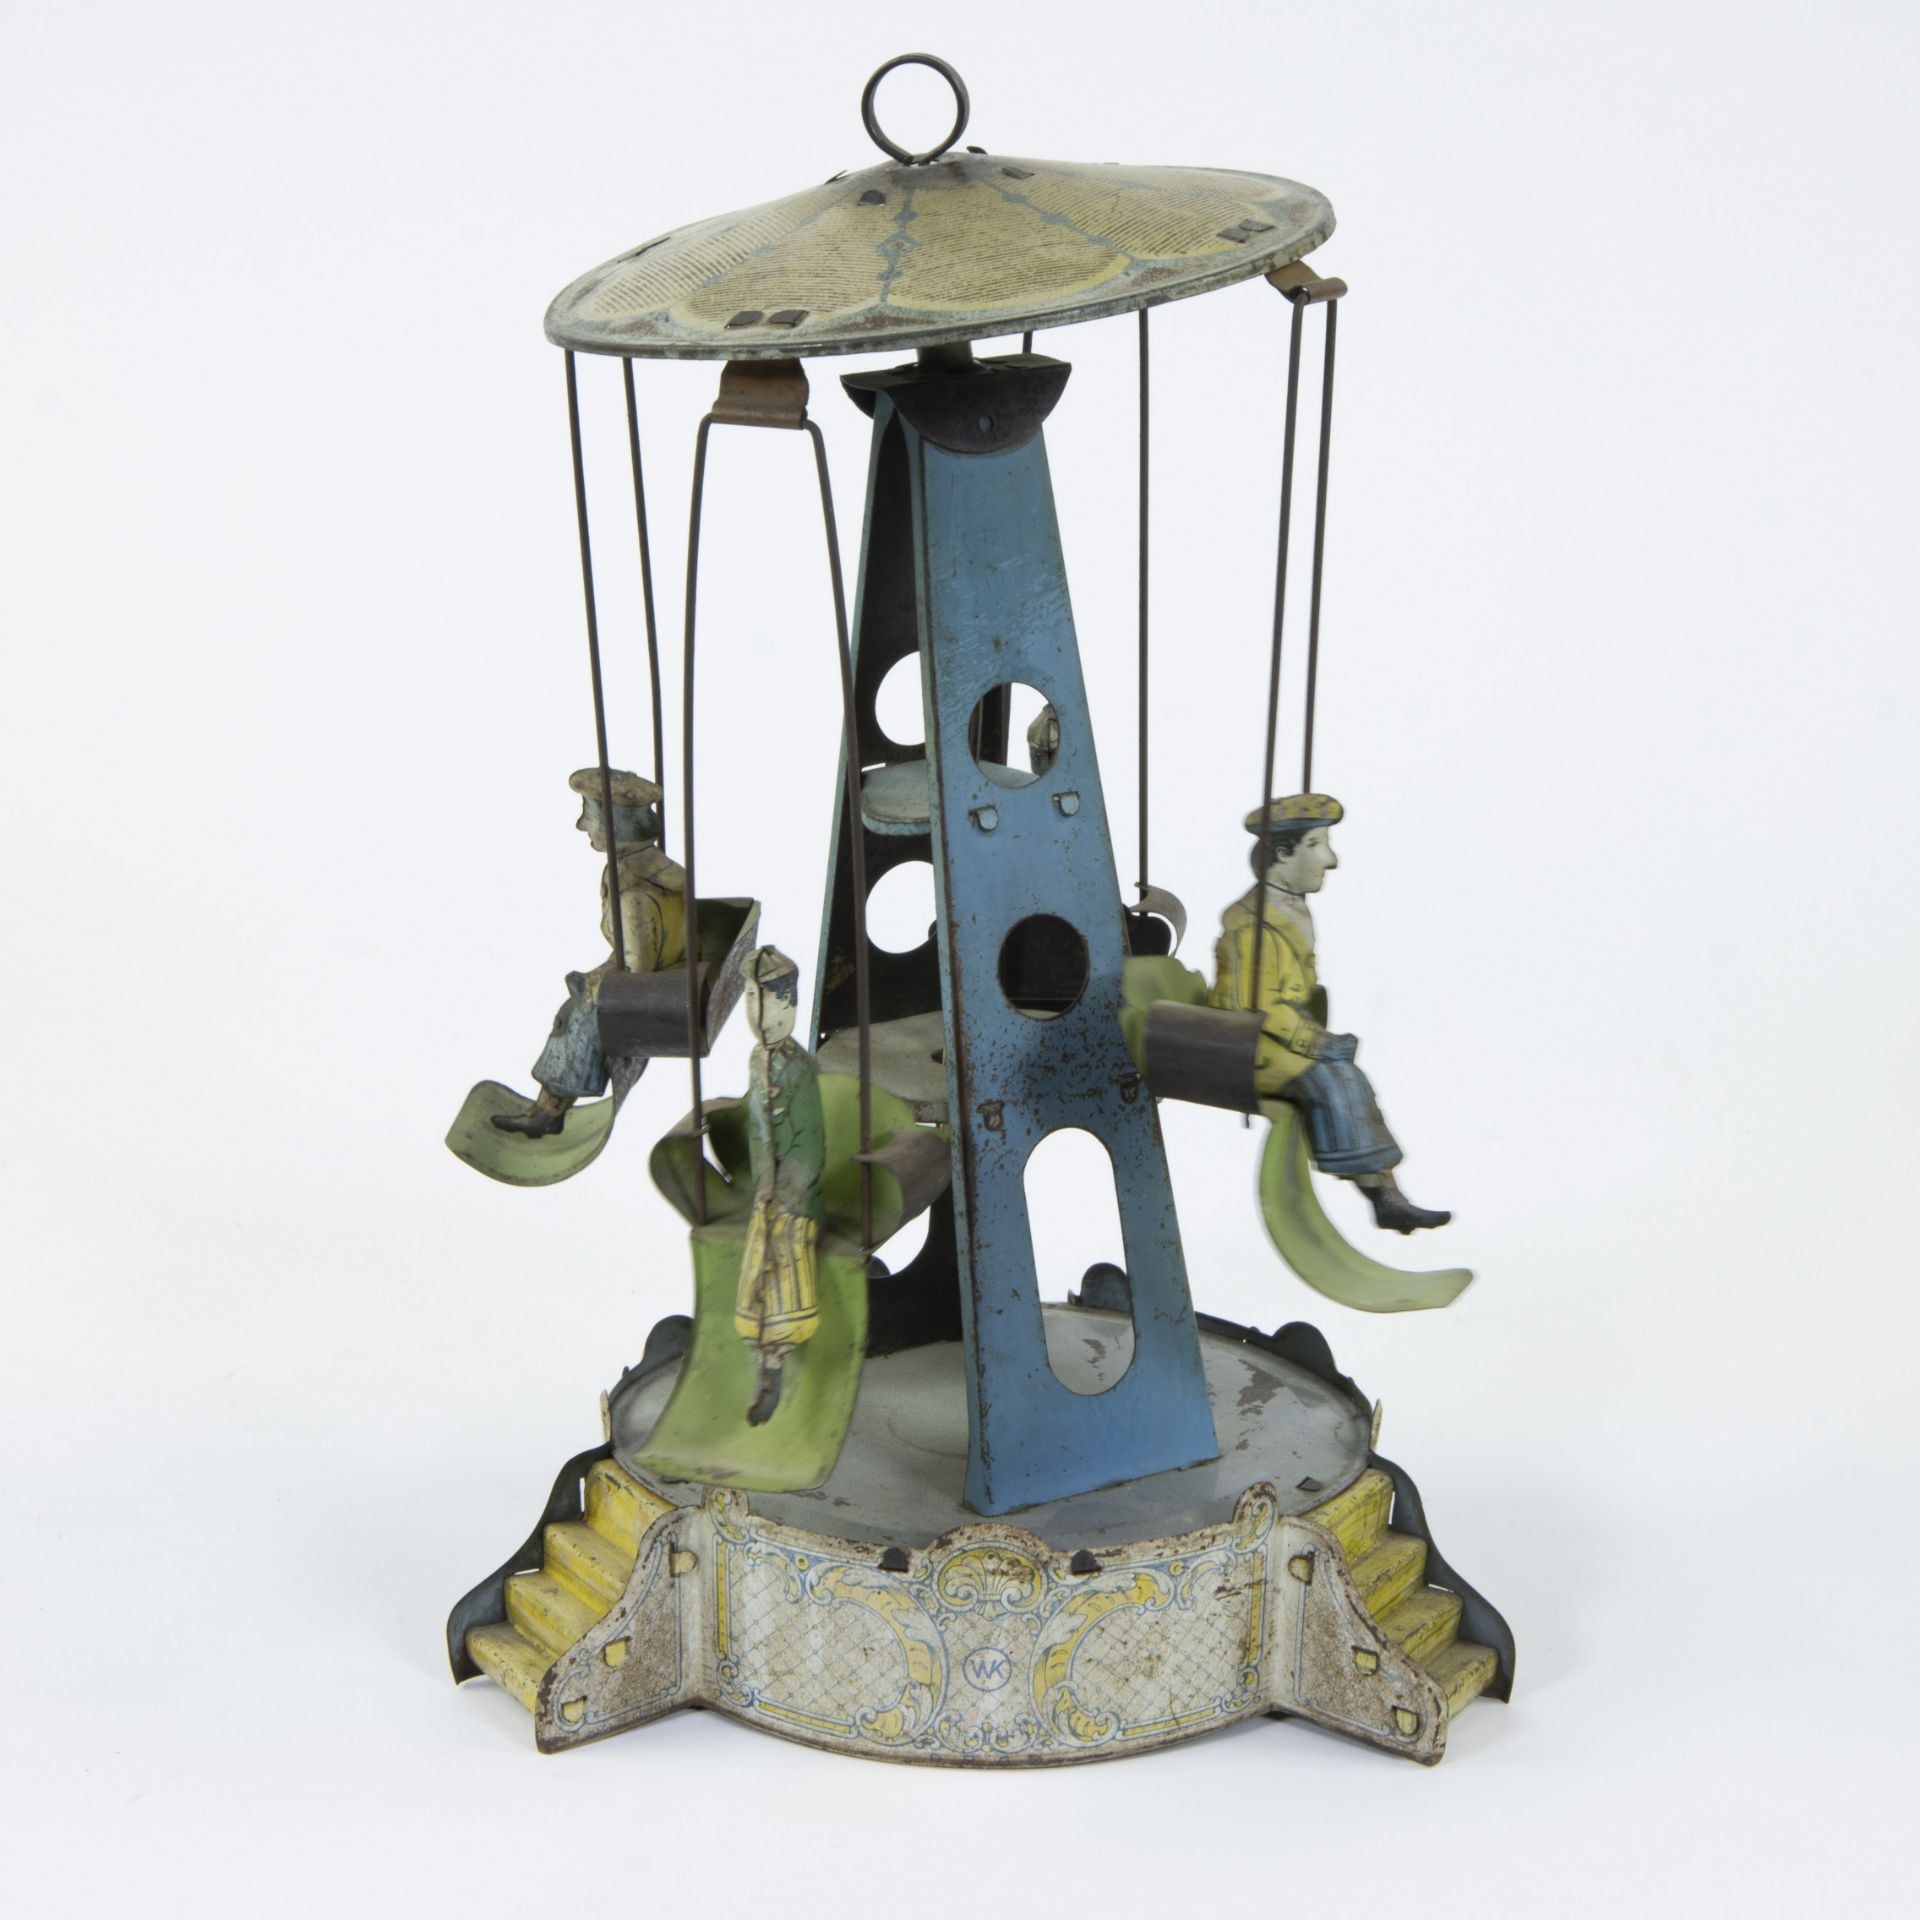 Old tin toy carousel, Mohr & Kraus 'Fliegerkarussell', Germany circa 1910, lithographic print